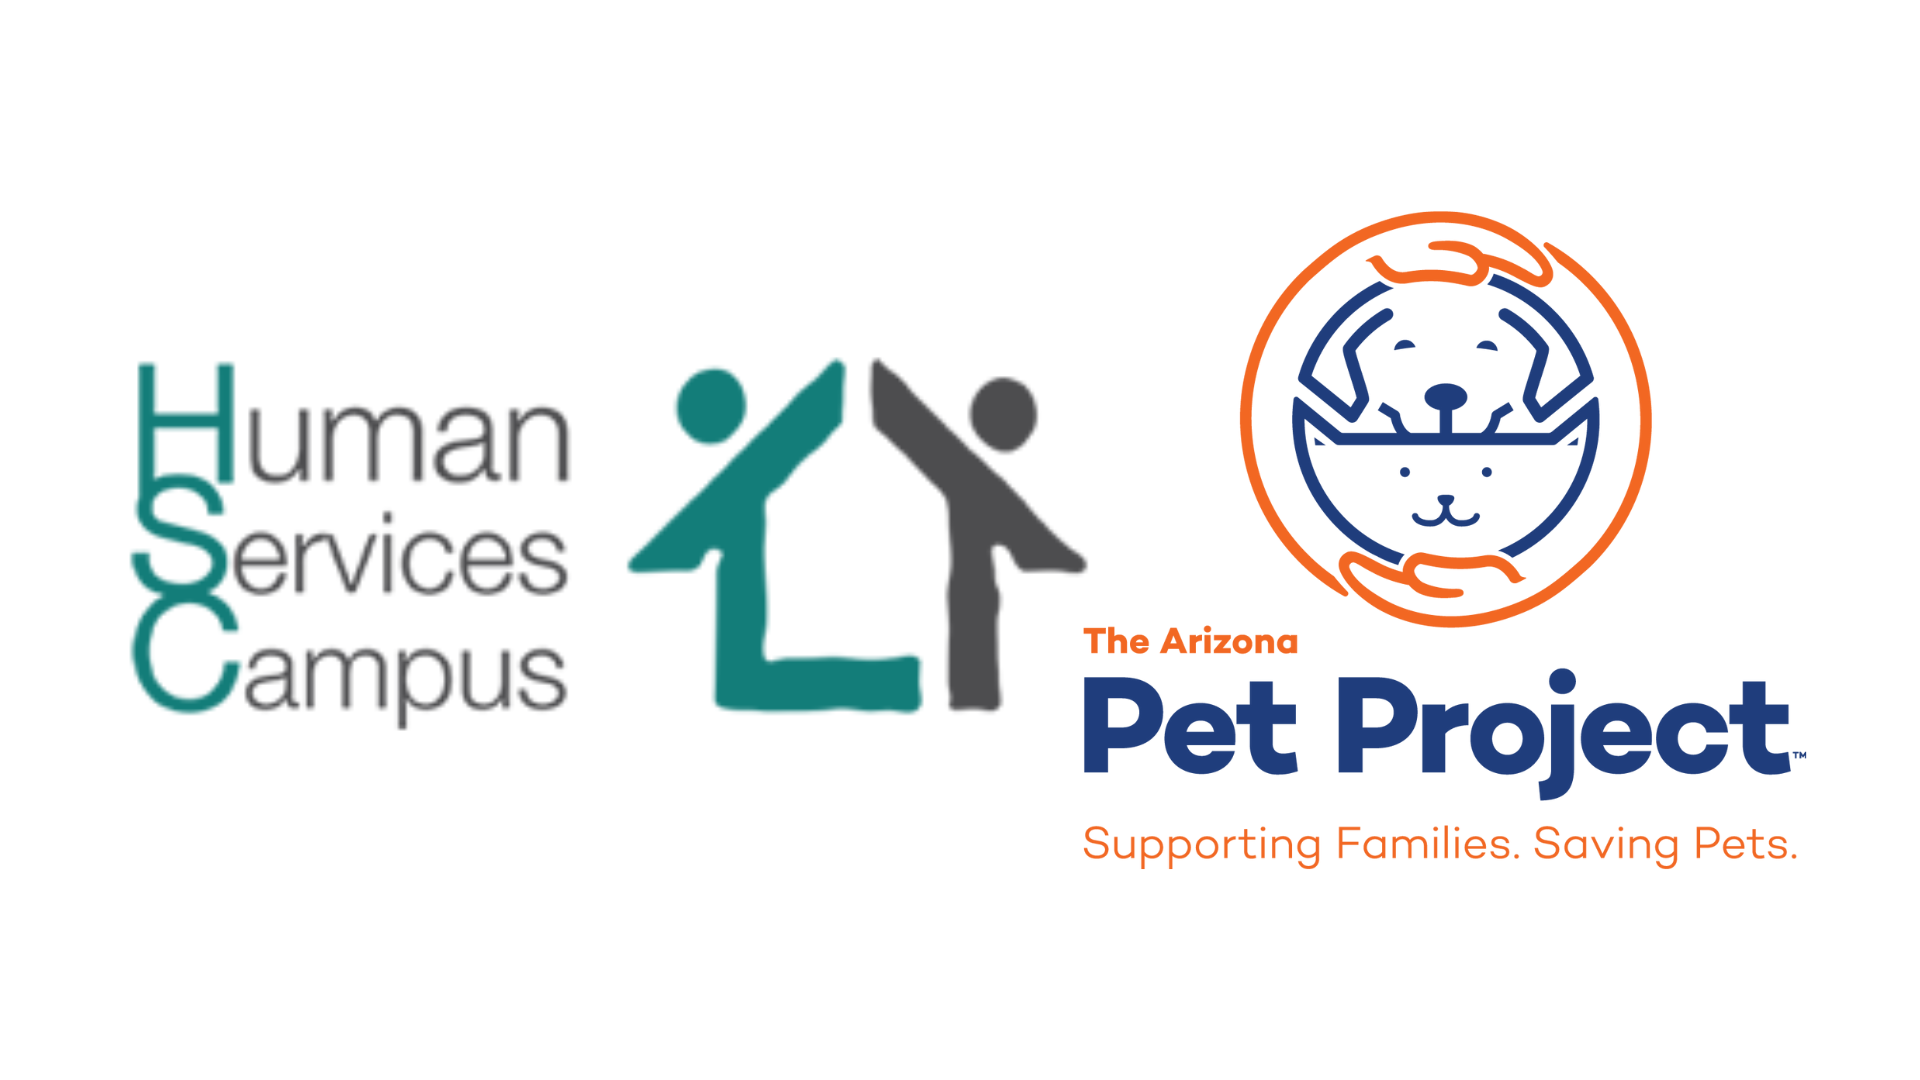 Human Services Campus and The Arizona Pet Project